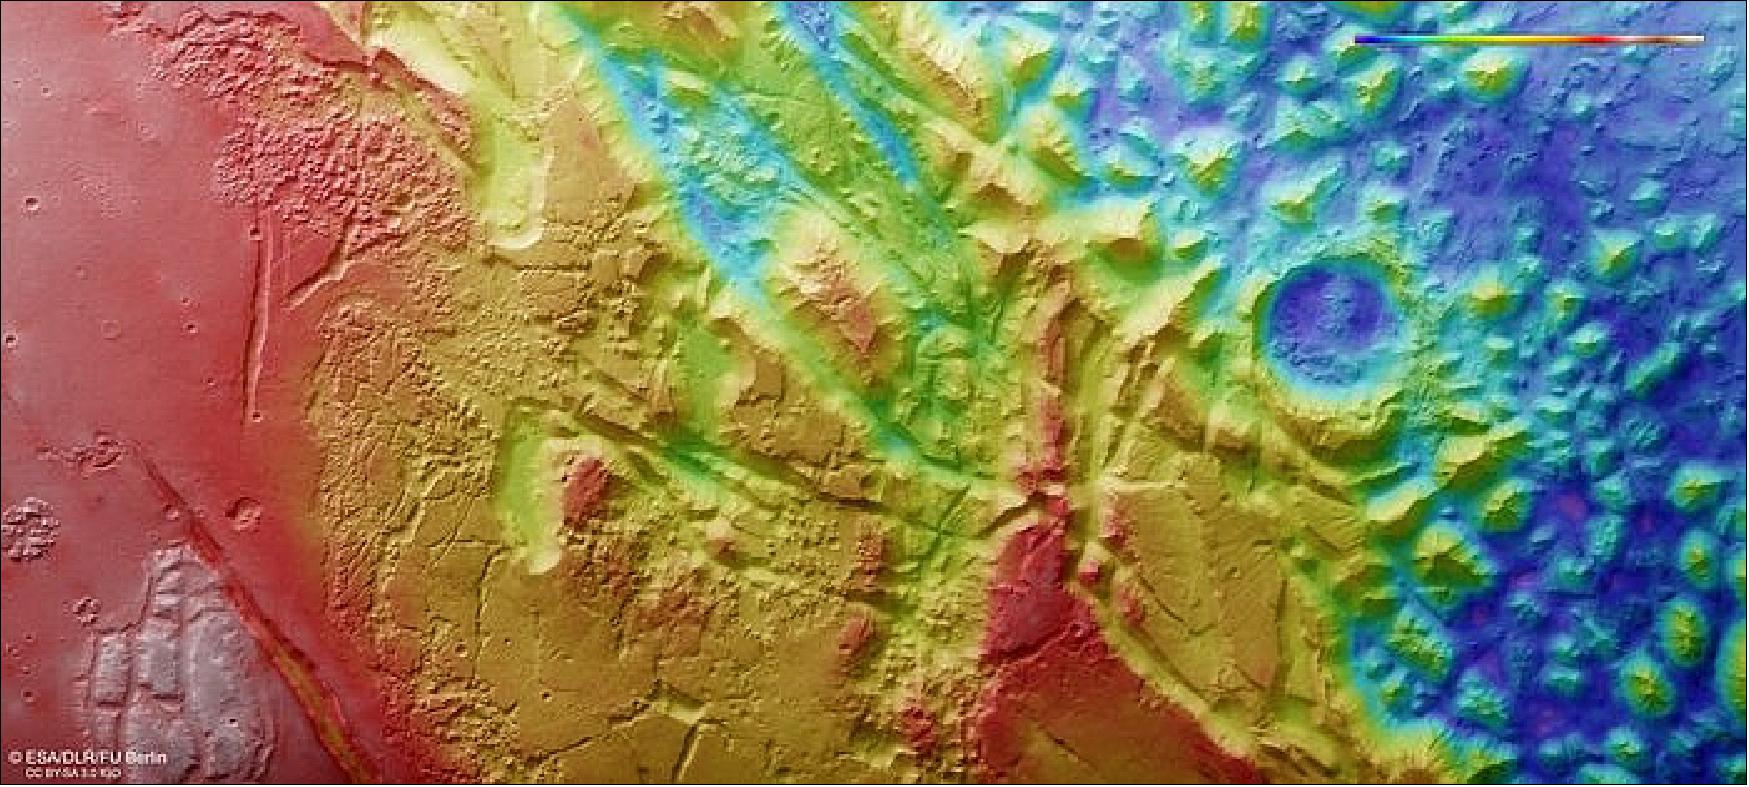 Figure 31: This color-coded topographic view shows Aurorae Chaos, a large area of chaotic terrain located in the Margaritifer Terra region on Mars. Lower parts of the surface are shown in blues and purples, while higher altitude regions show up in whites, yellows, and reds, as indicated on the scale to the top right. This view is based on a digital terrain model of the region, from which the topography of the landscape can be derived. It comprises data obtained by the High Resolution Stereo Camera on Mars Express on 31 October 2018 during orbit 18765. The ground resolution is approximately 14 m/pixel and the images are centered at about 327ºE/11ºS. North is to the right (image credit: ESA/DLR/FU Berlin, CC BY-SA 3.0 IGO)